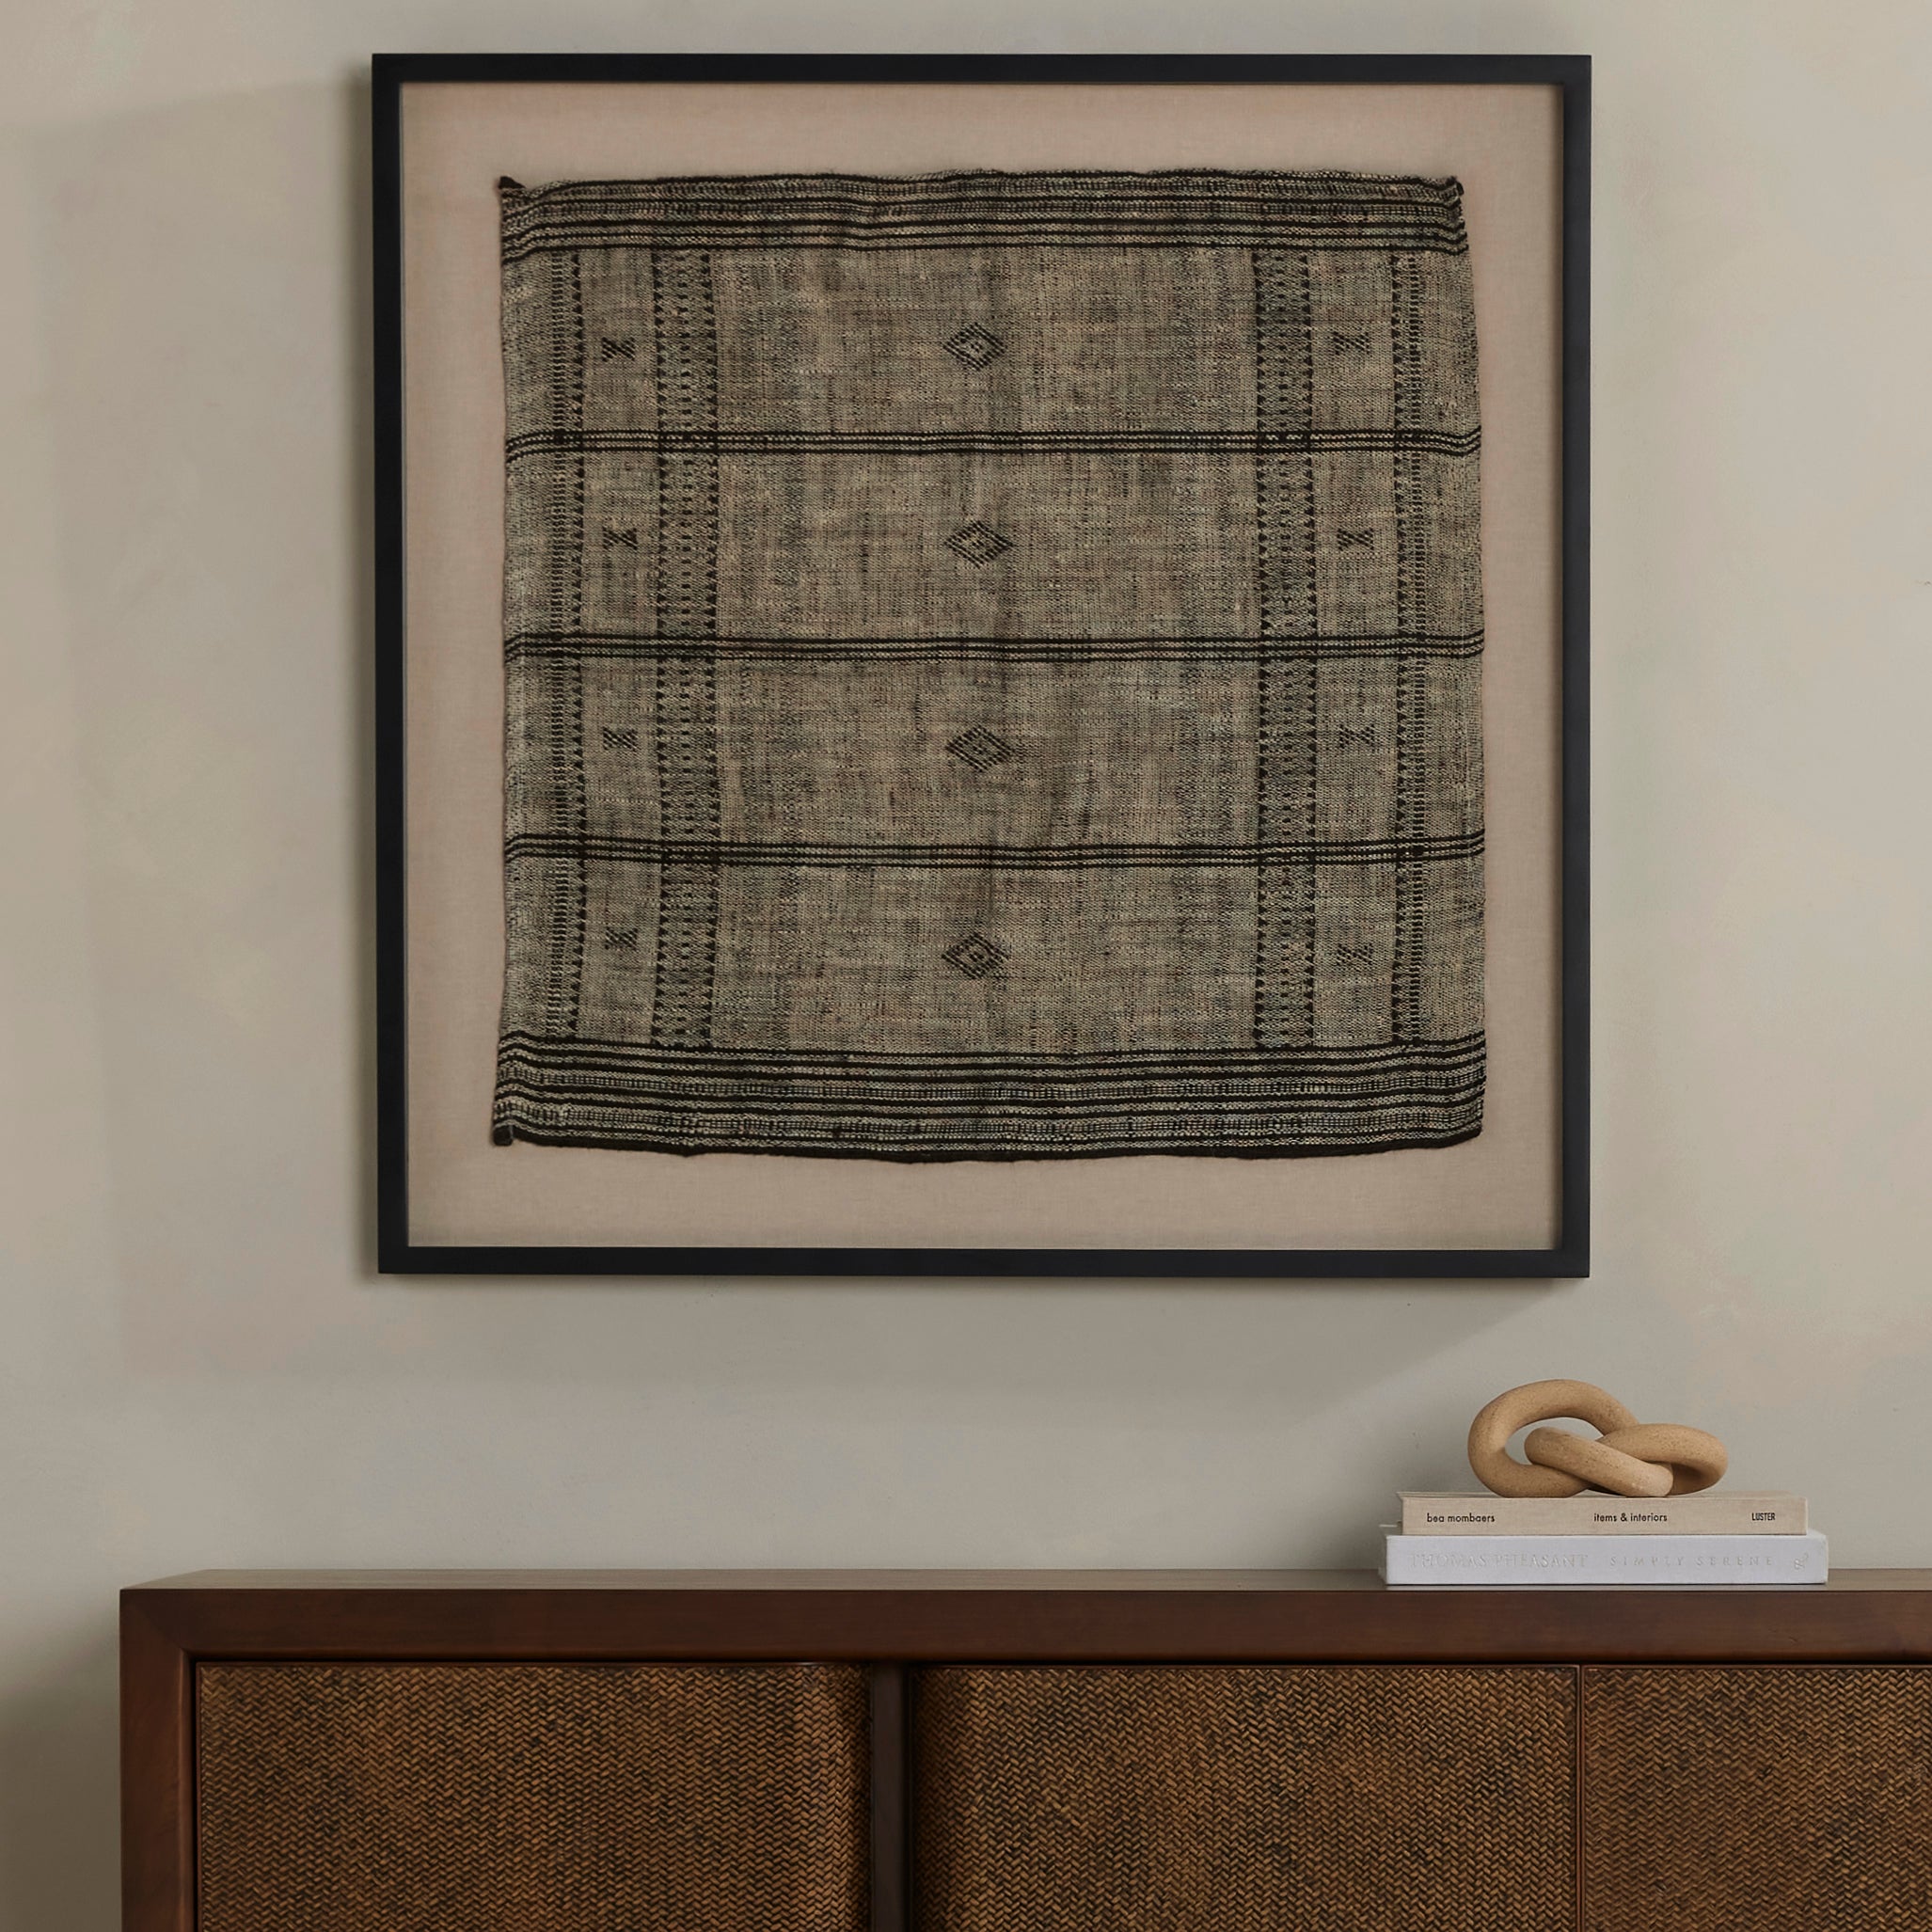 A 500-year-old tradition comes to life on this 100% wool, handwoven textile. Crafted on a traditional frame loom following a tradition created by the Vankars of the Bhujodi village in India, a process that can take up to two days to complete. Finished with fringe tassels on both ends. If not currently in stock, this piece ships within three weeks. Amethyst Home provides interior design, new home construction design consulting, vintage area rugs, and lighting in the Houston metro area.